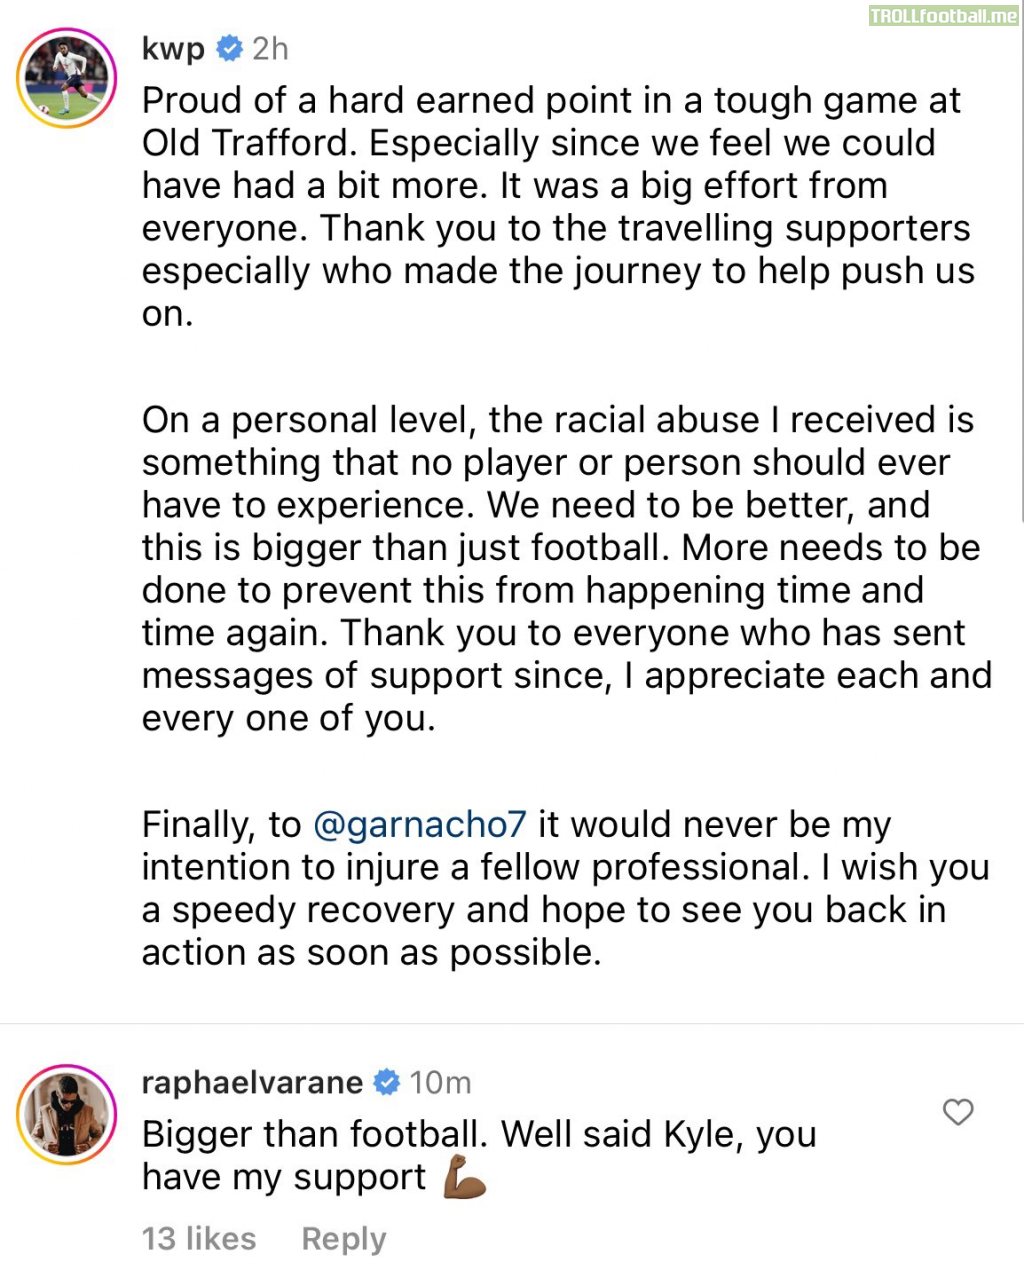 Southampton's Kyle Walker-Peters on Instagram has sent his best to Alejandro Garnacho, with Raphael Varane among those to comment.